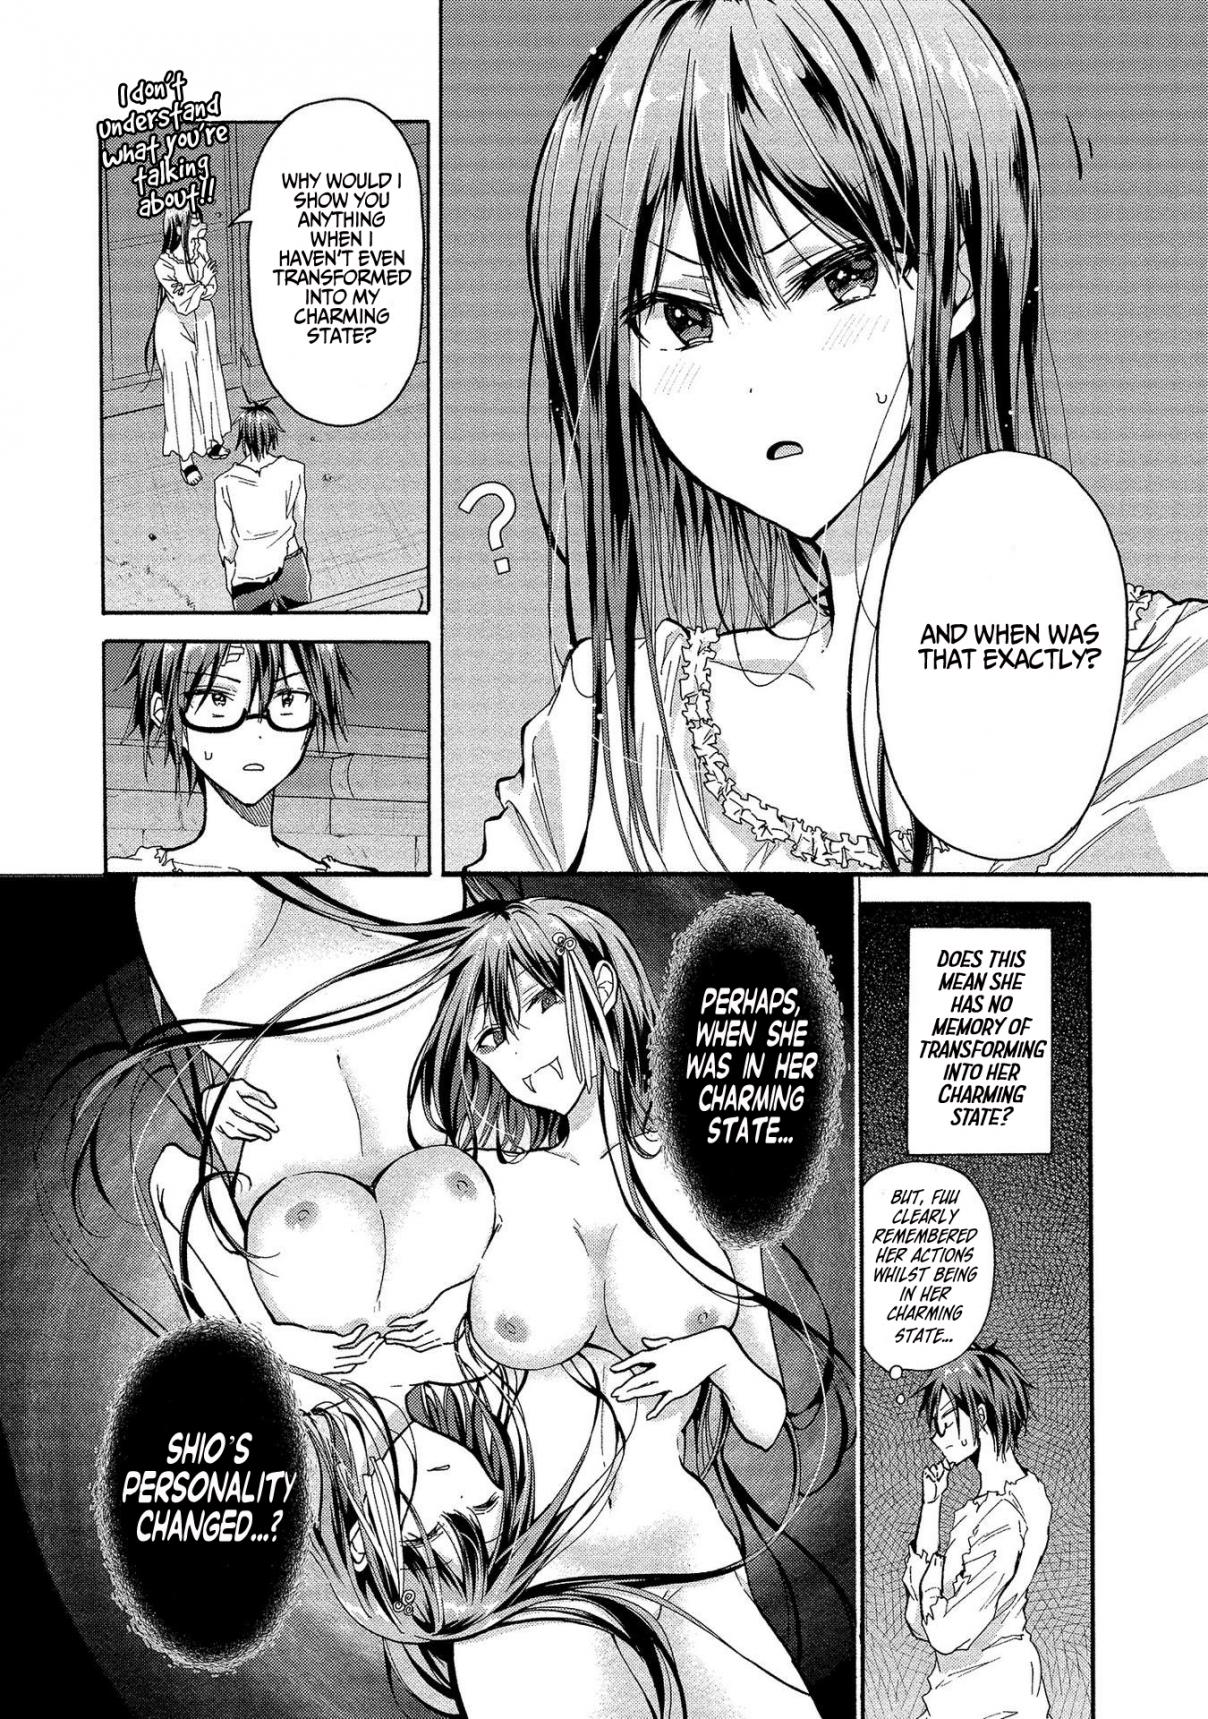 The Three Sisters Are Trying To Seduce Me!! Vol. 1 Ch. 5 Yula's Honey Trap